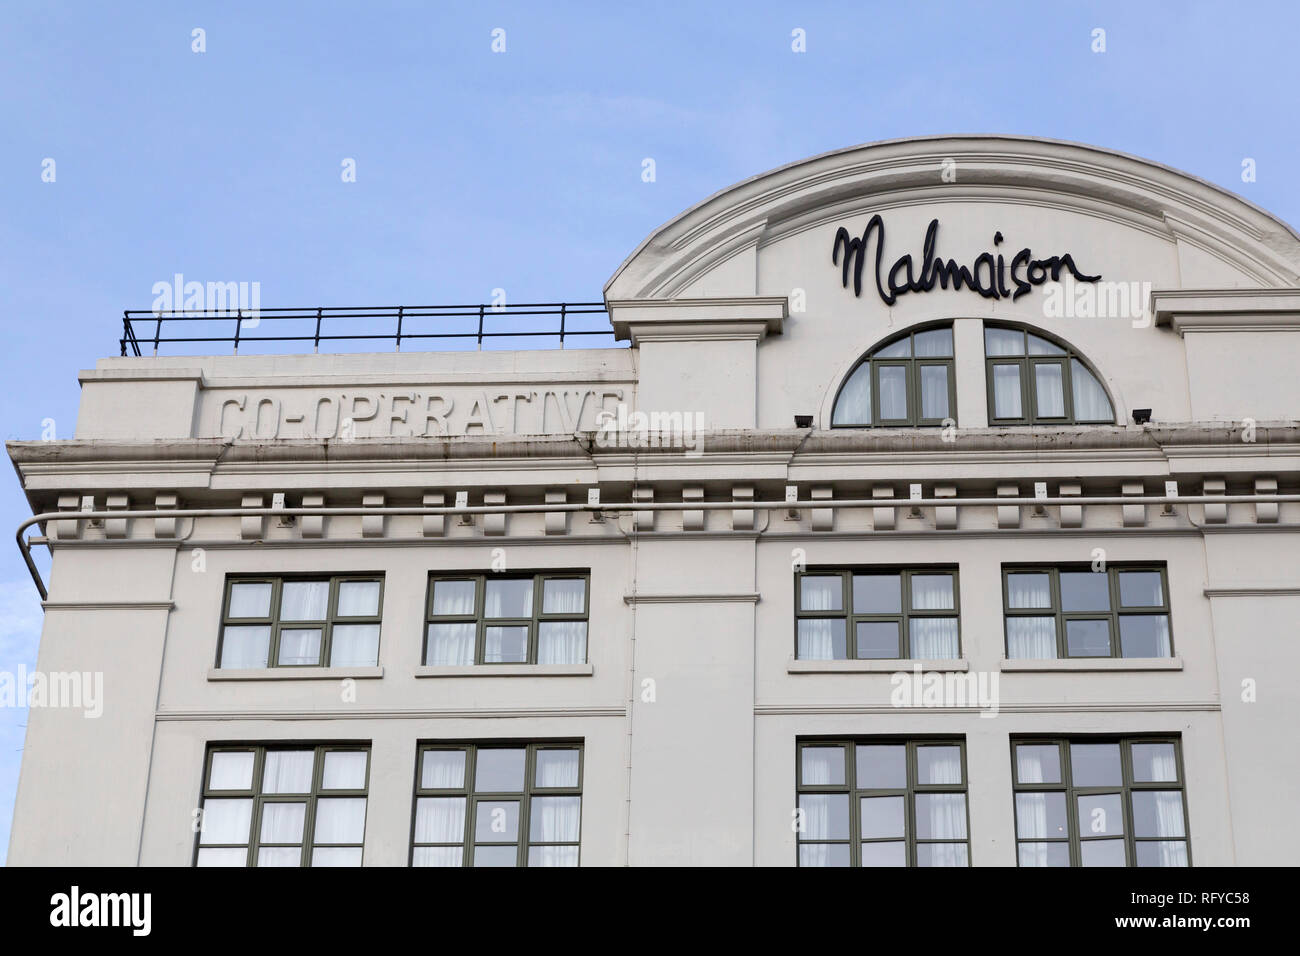 The Malmaison Hotel in Newcastle upon Tyne, England. The hotel occupies the former Cooperative building on the Quayside. Stock Photo